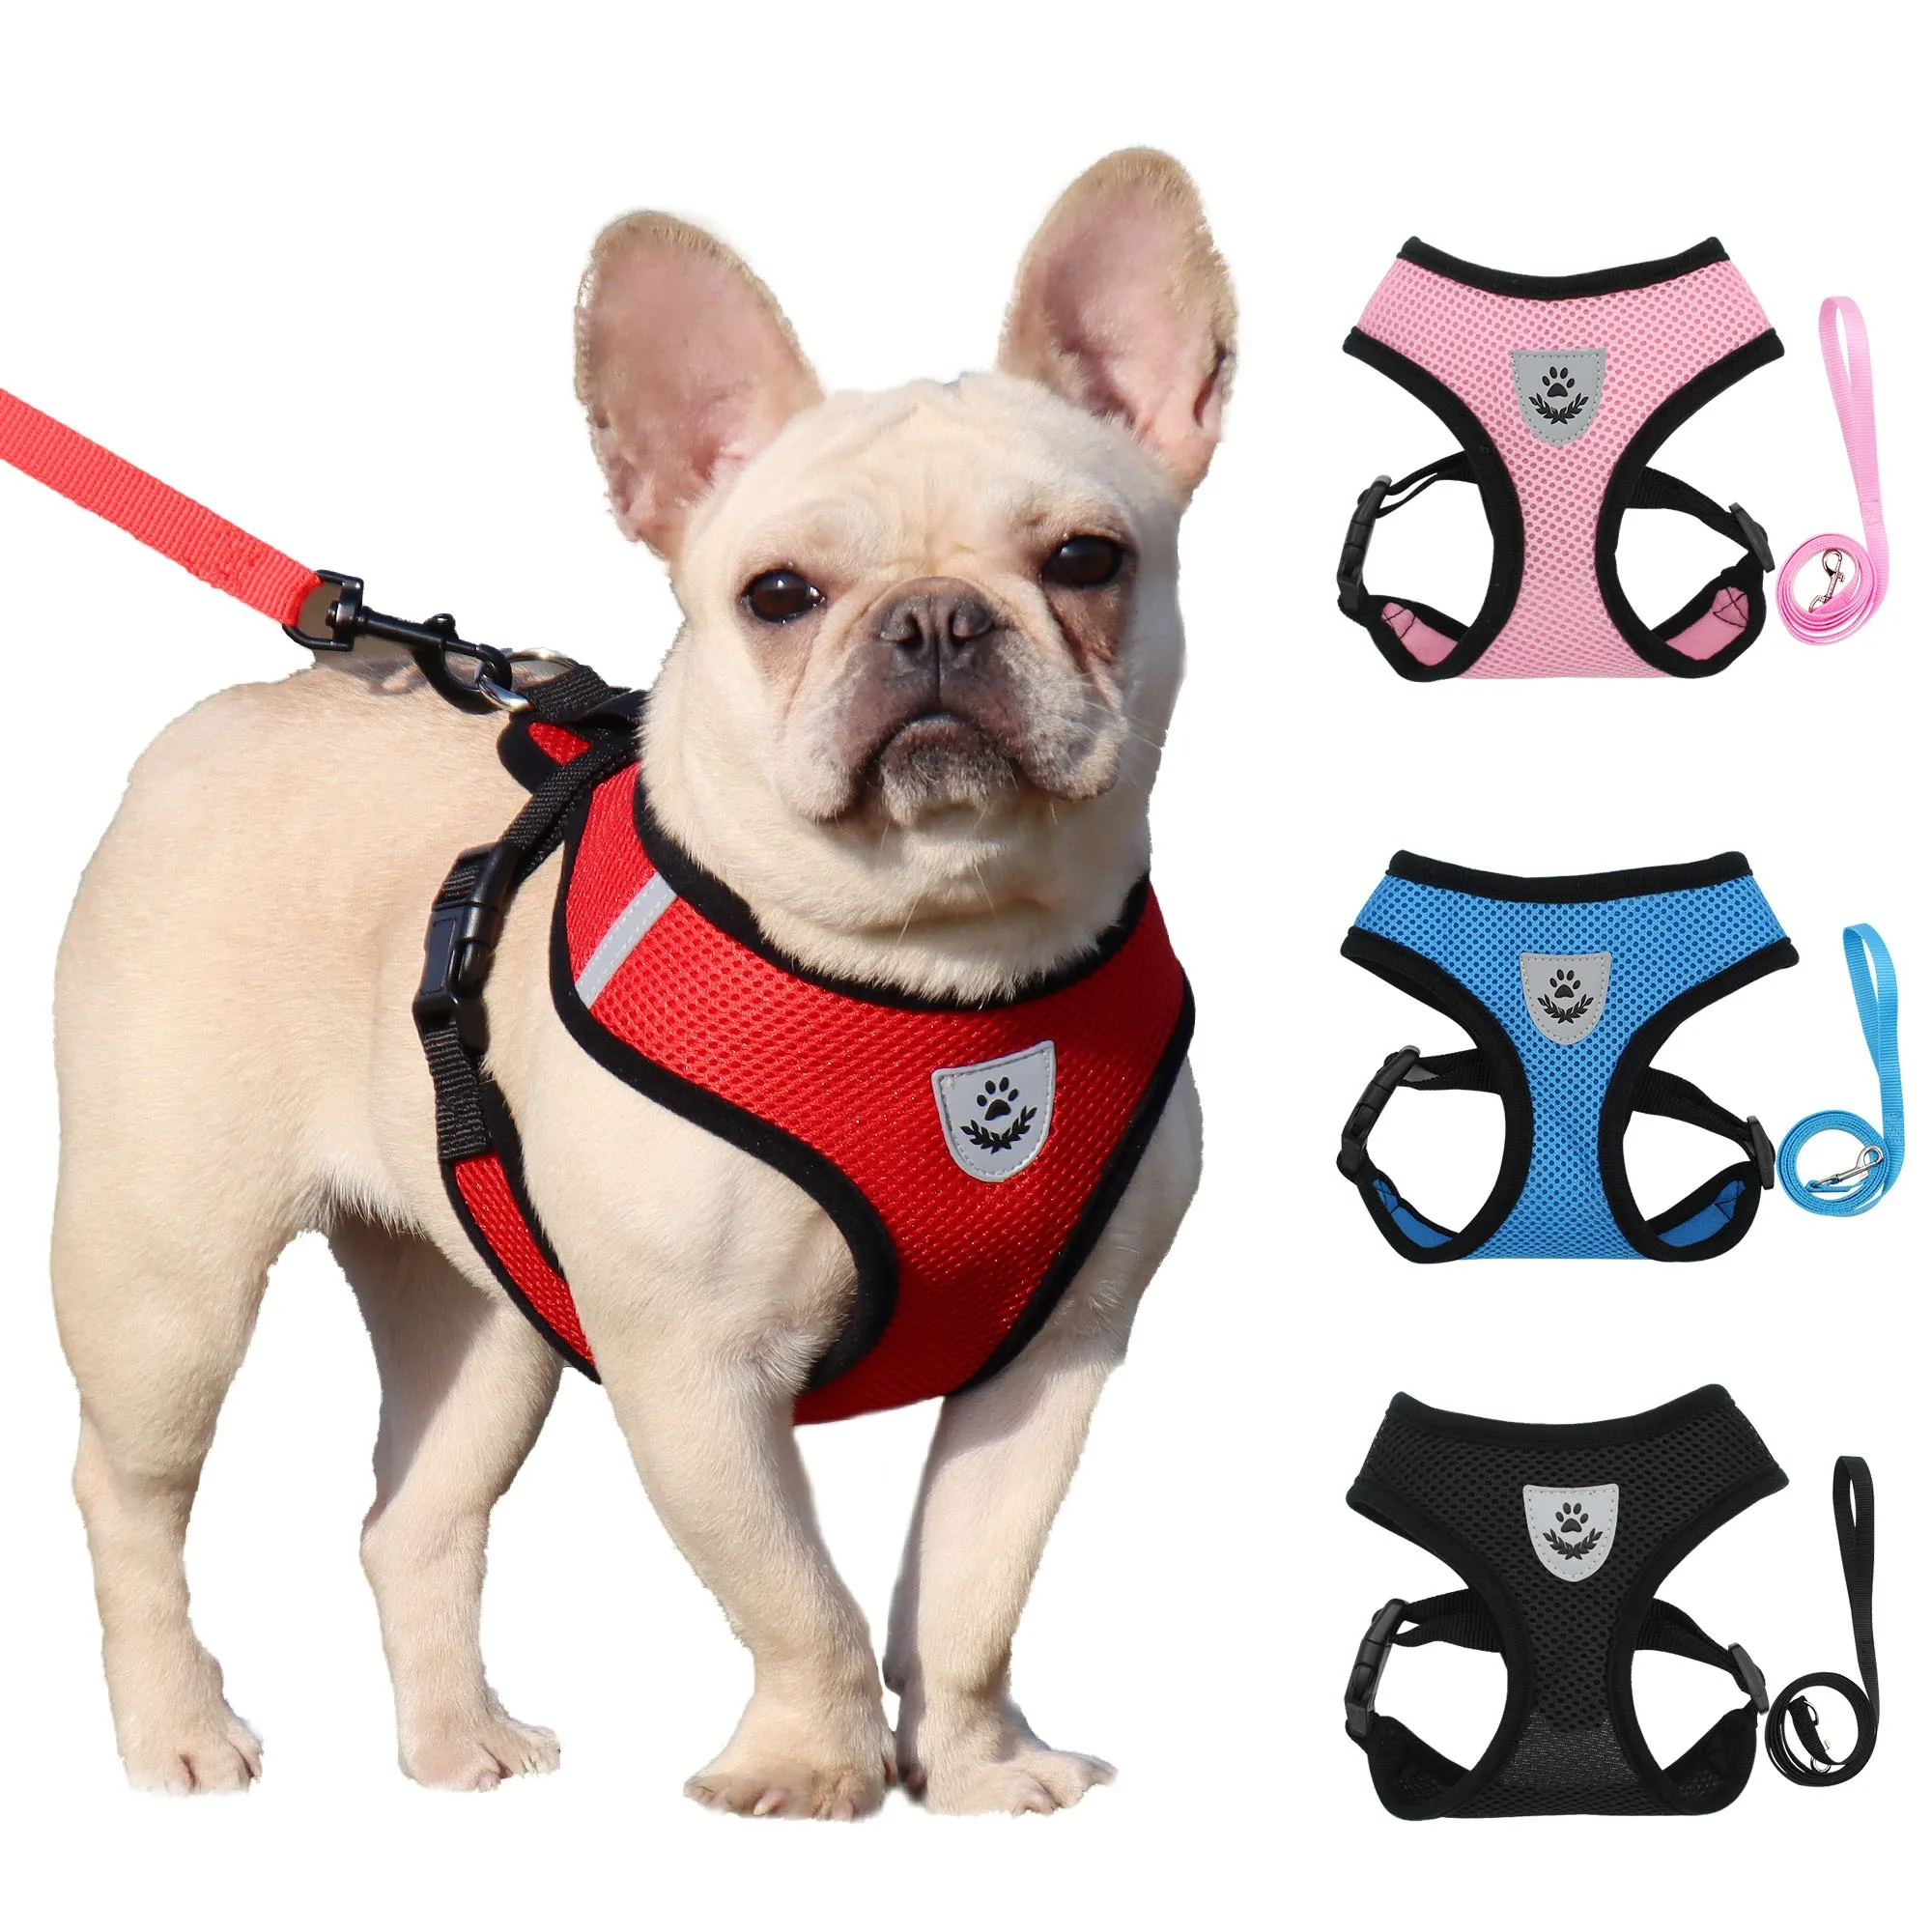 

High Quality Breathable Mesh Small Dog Pet Harness and Leash Set Puppy Cat Vest Harness Collar, As shown below